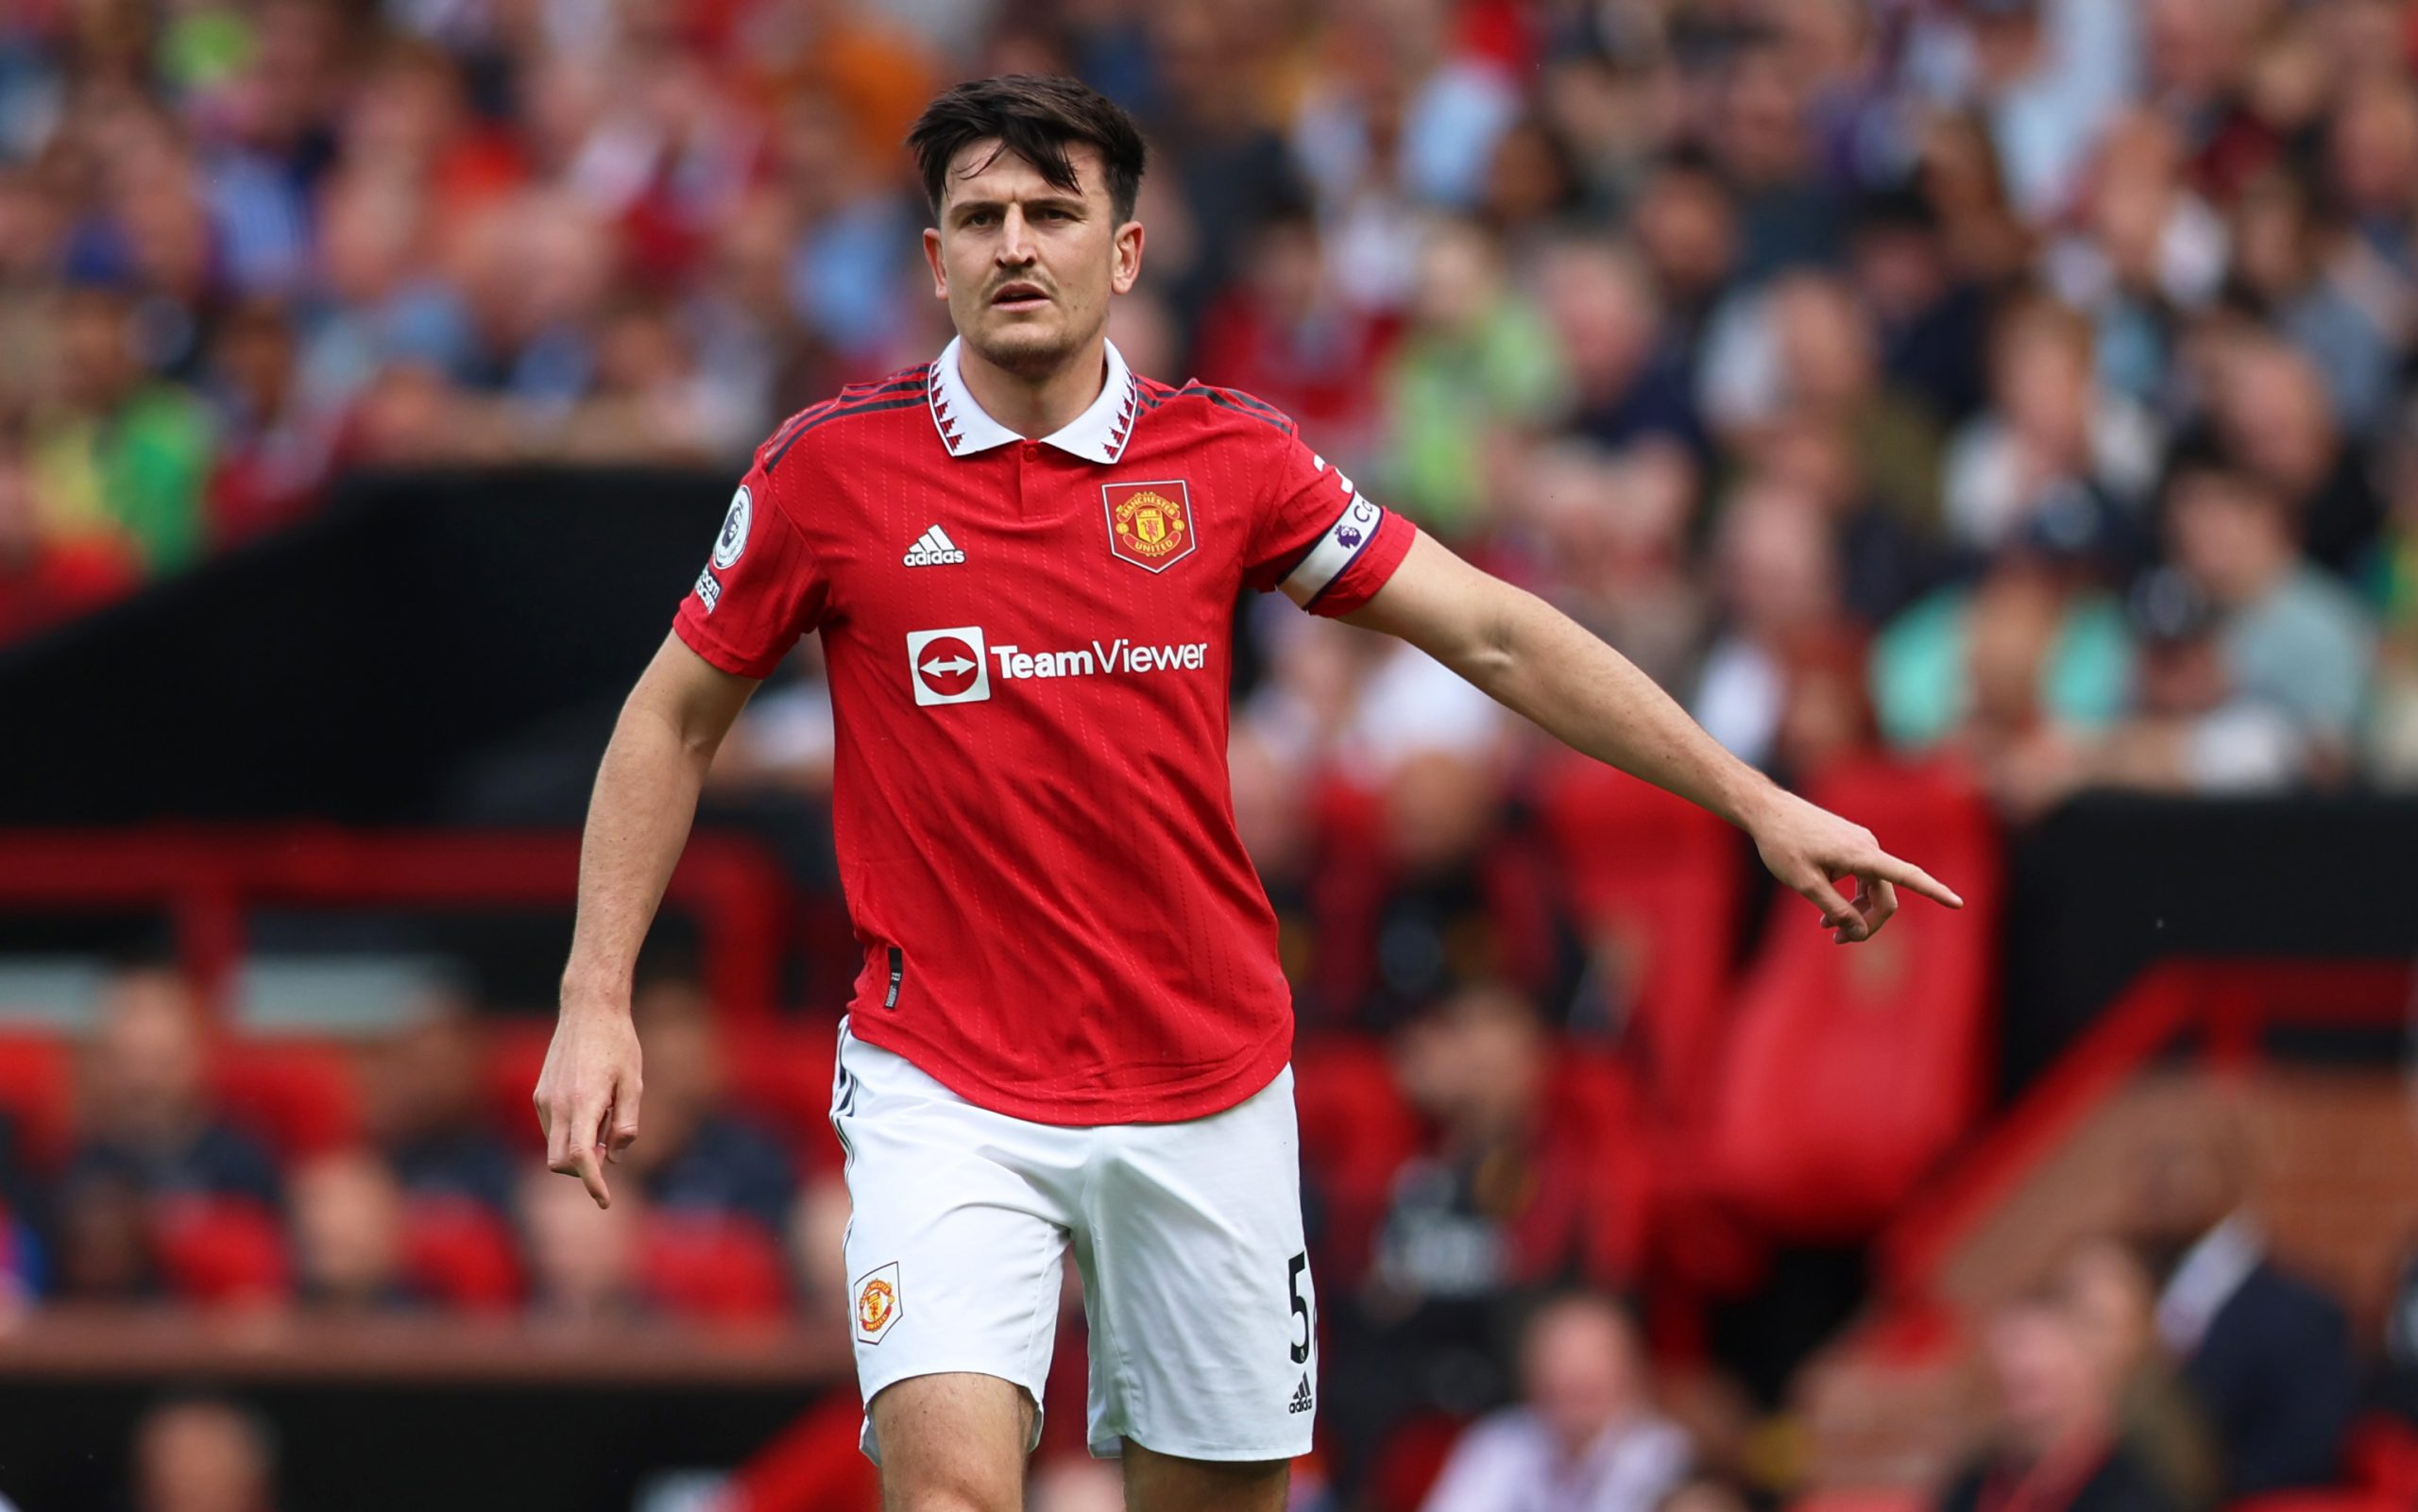 Harry Maguire of Manchester United was stripped of his captaincy by Erik ten Hag.